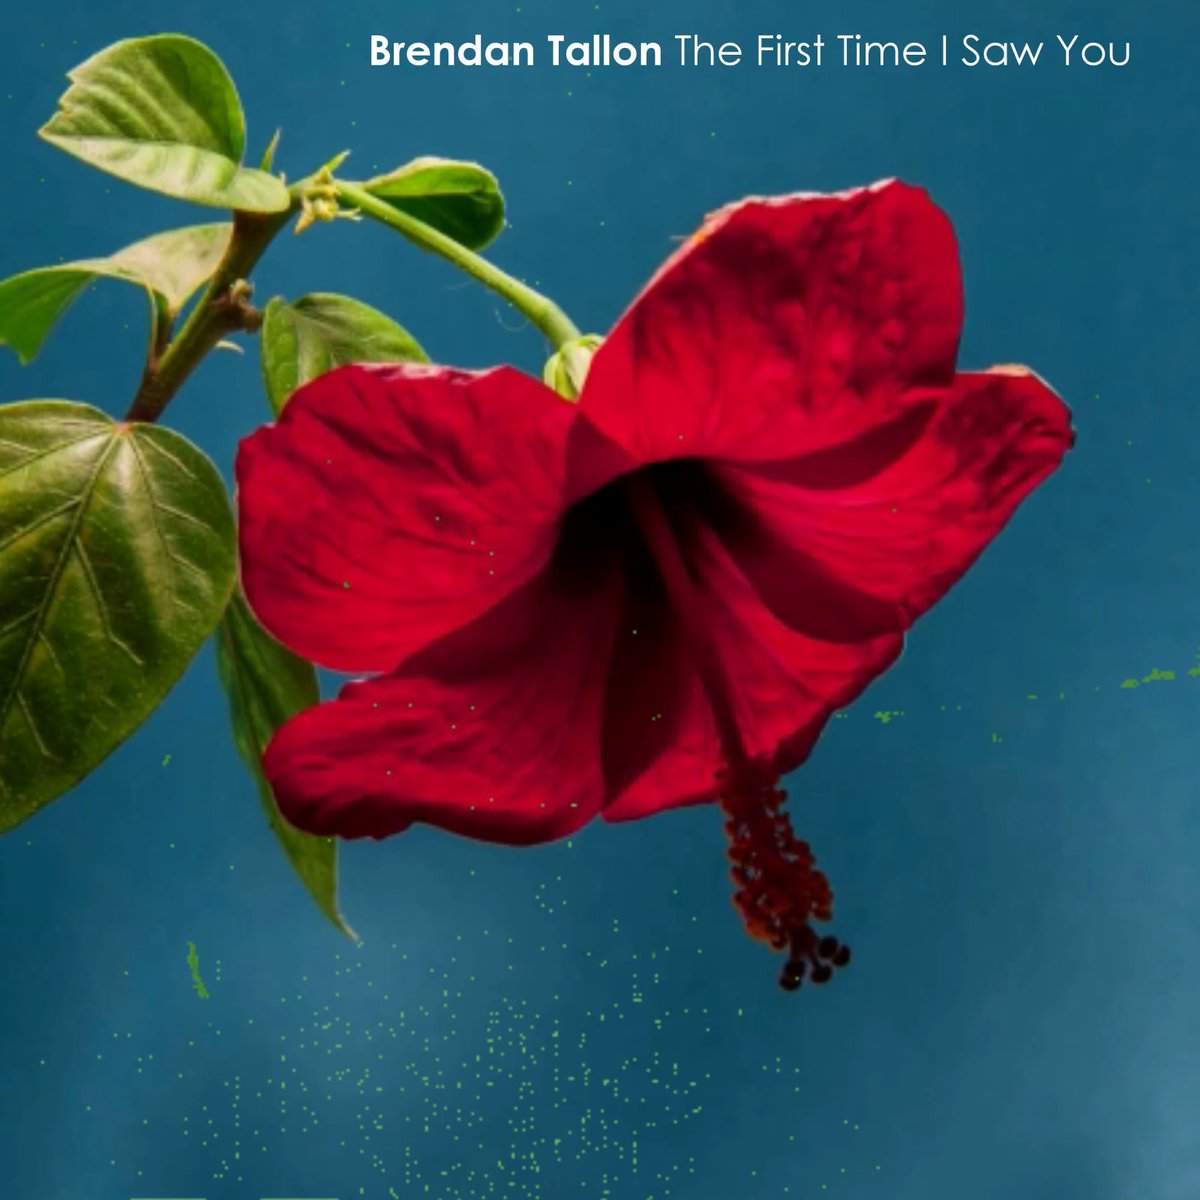 Tomorrow @BrendanTallon releases 3rd single & brilliant 'The First Time I Saw You' from his highly anticipated album 'Love In These Times'. Go buy the single tomorrow and preorder the the album now via bandcamp, you won't be disappointed.
 #buythemusic #supporttheartists